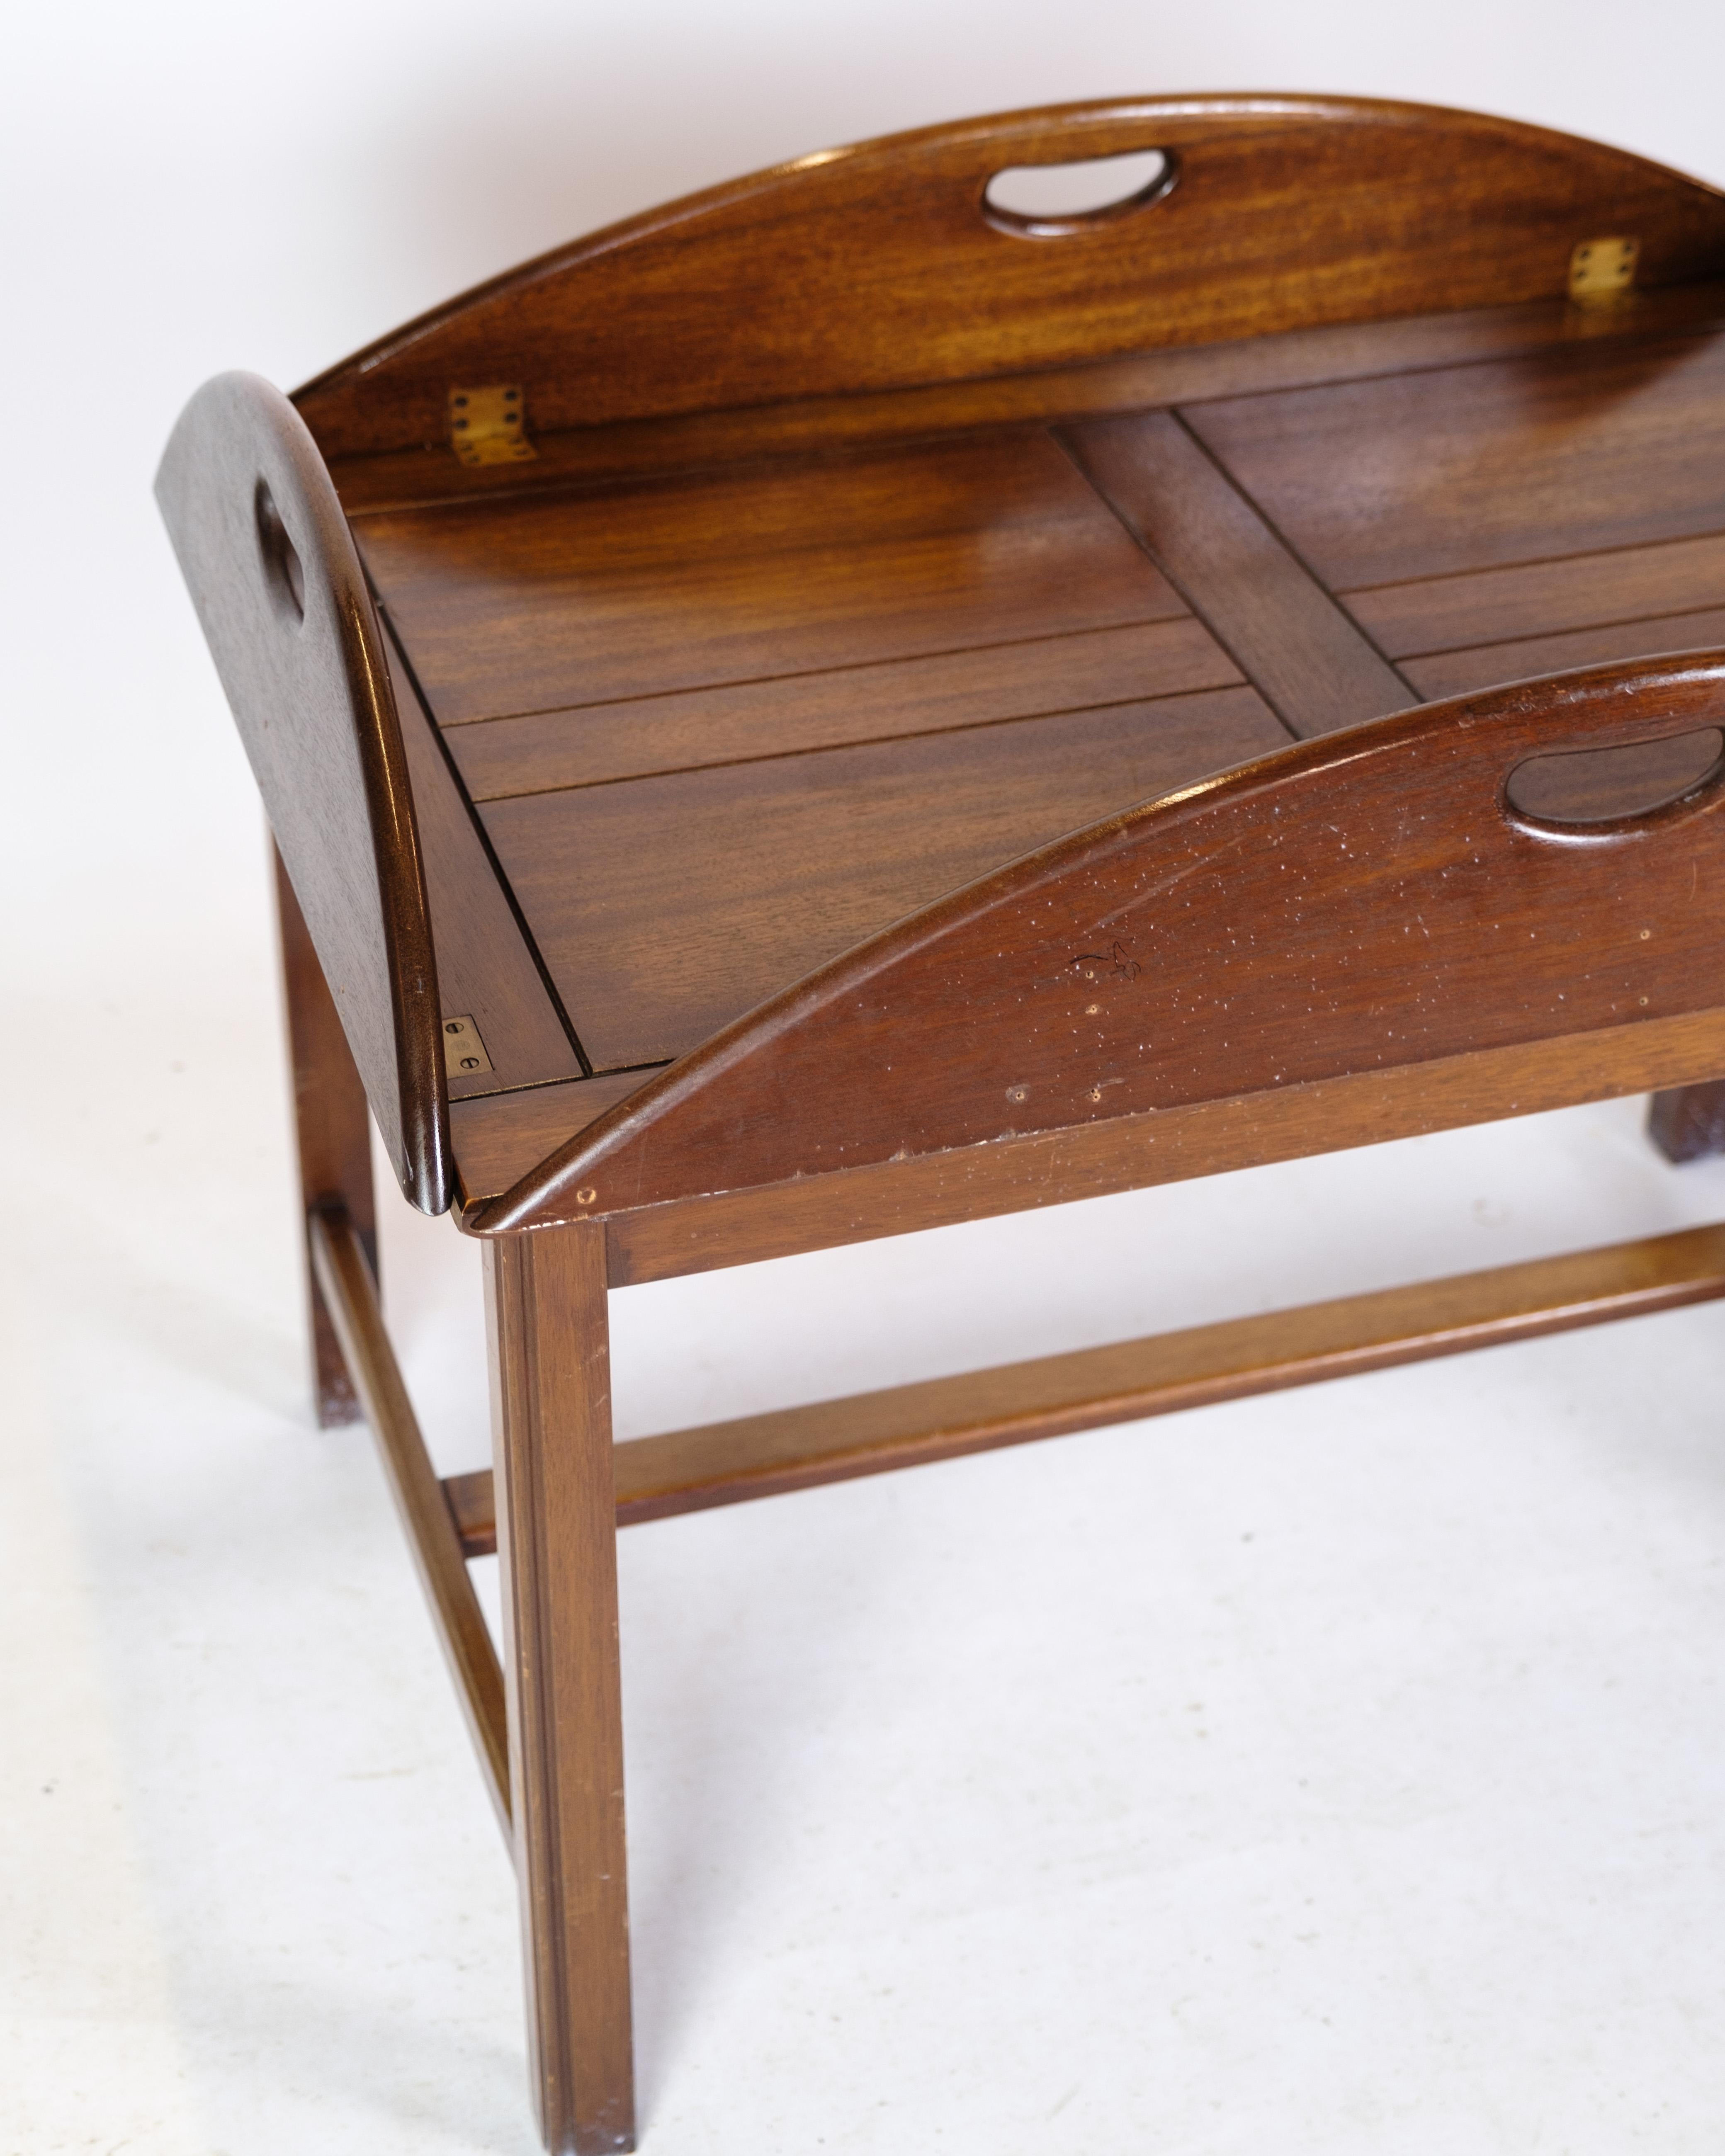 Butler table in mahogany of Danish design with brass fittings from around the 1950s.
Dimensions in cm: H: 55 W: 120 D: 88